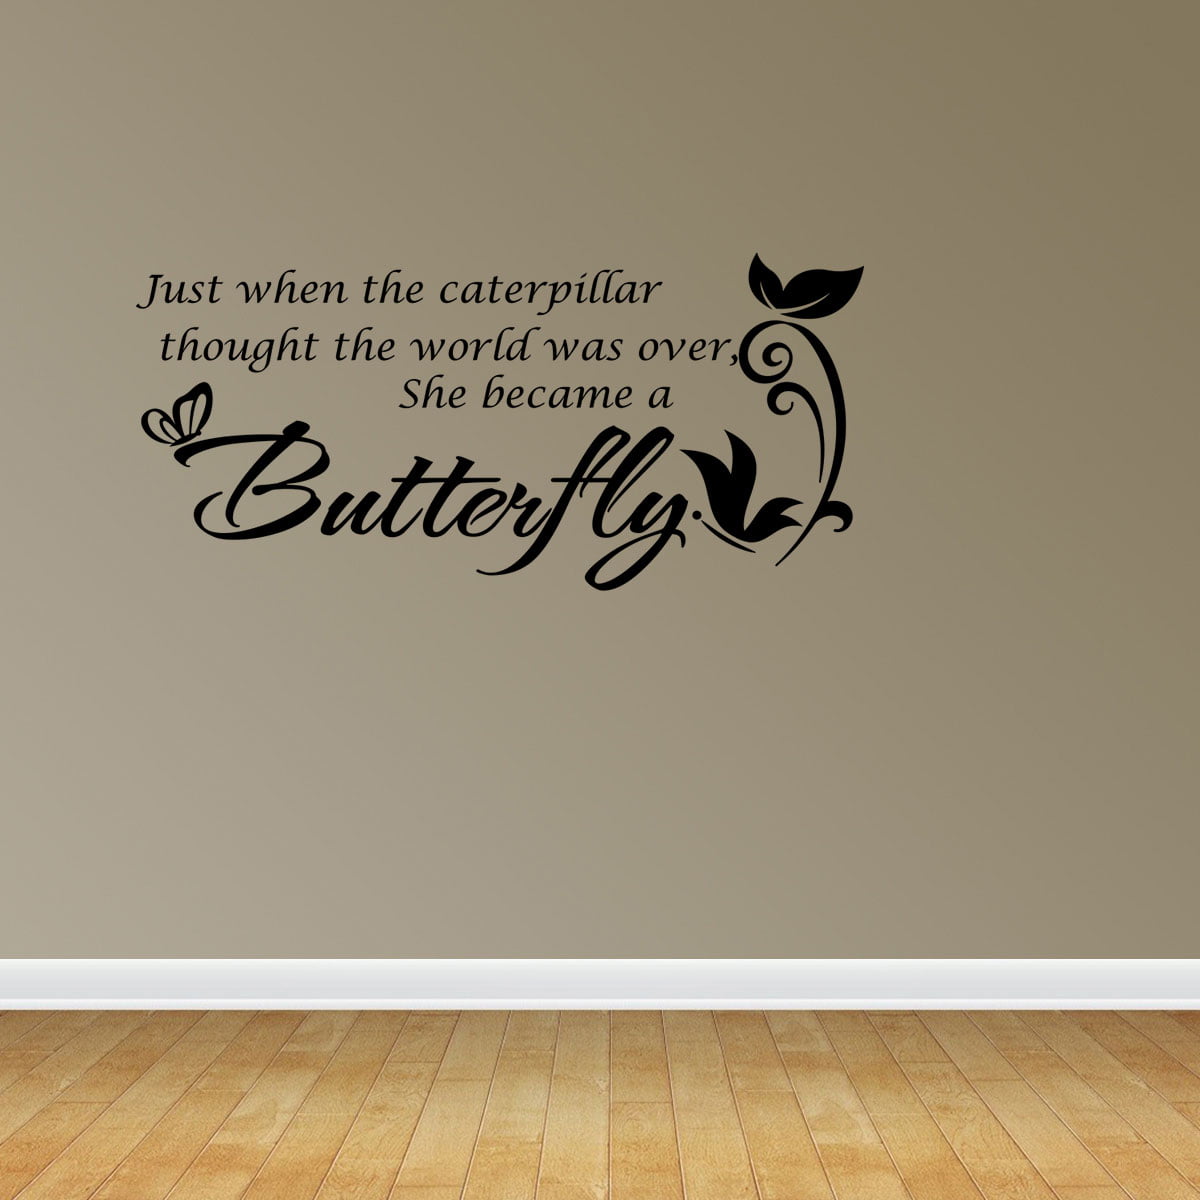 Peel & Stick Wall Sticker Design with Vinyl Moti 2536 3 Decal Black Size 20 Inches x 40 Inches I Am Beautiful Bedroom Quote Kids Teen Boy Girl Quote Color